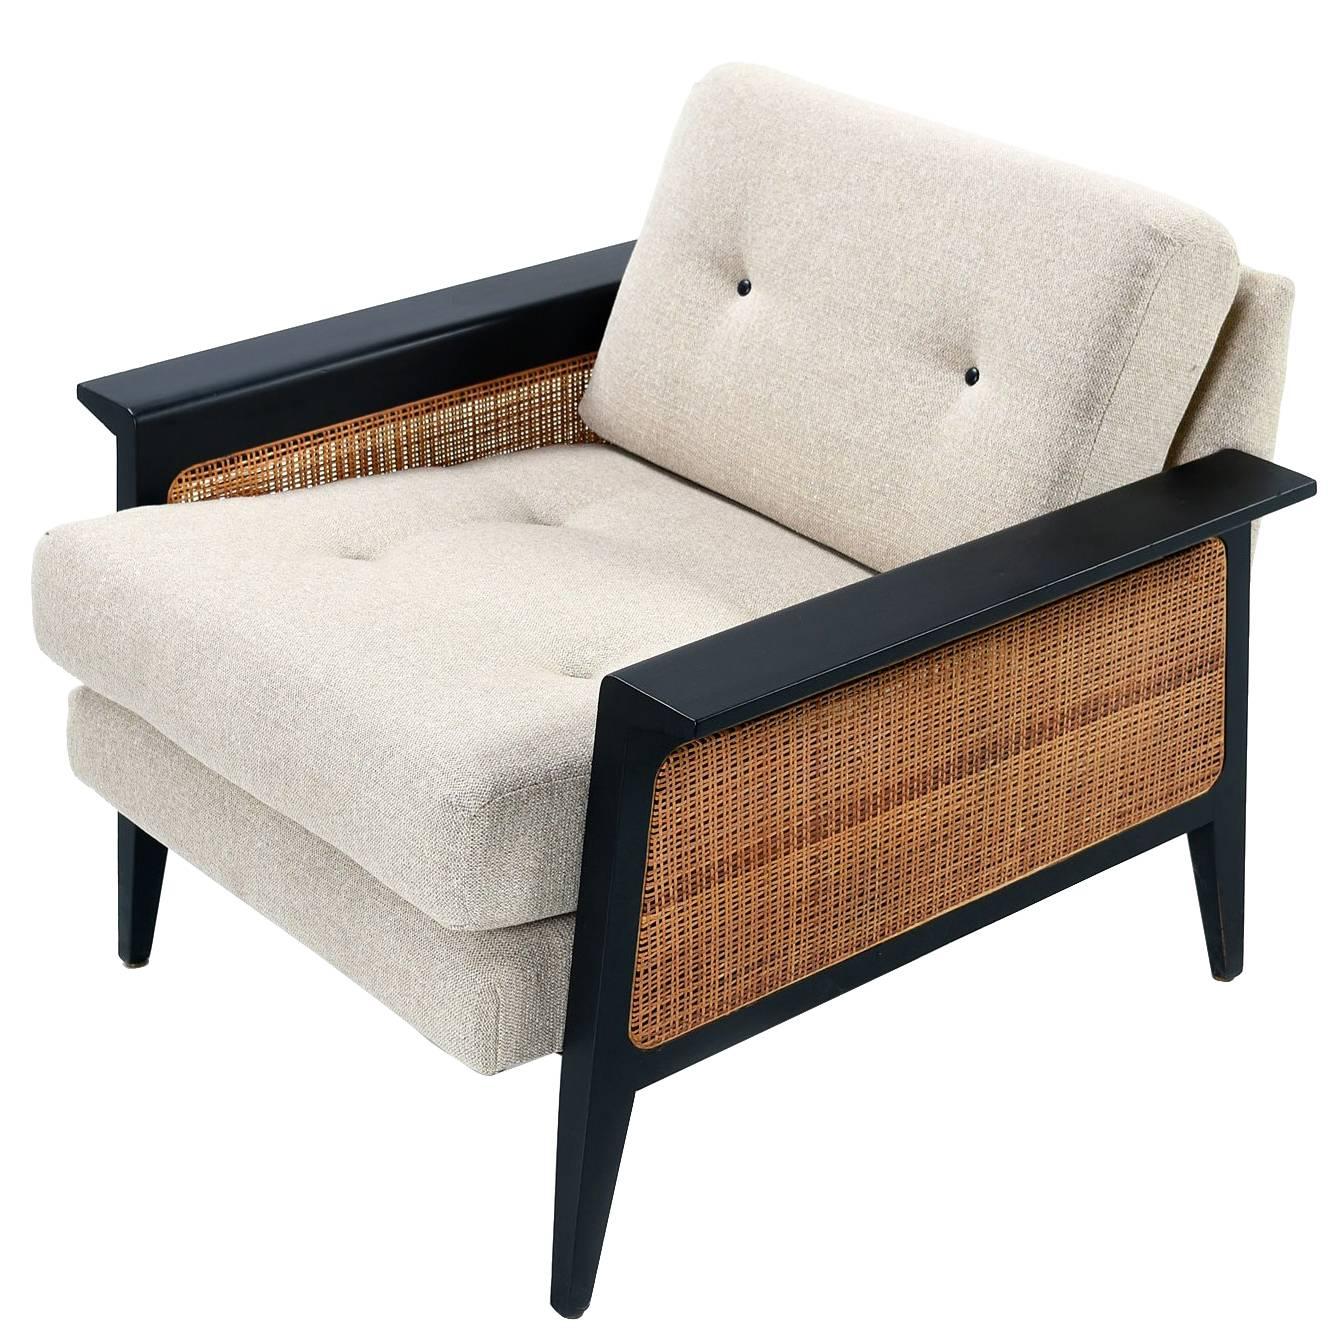 Restored Mid-Century Modern Caned Lounge Chair by Galloways, circa 1950's